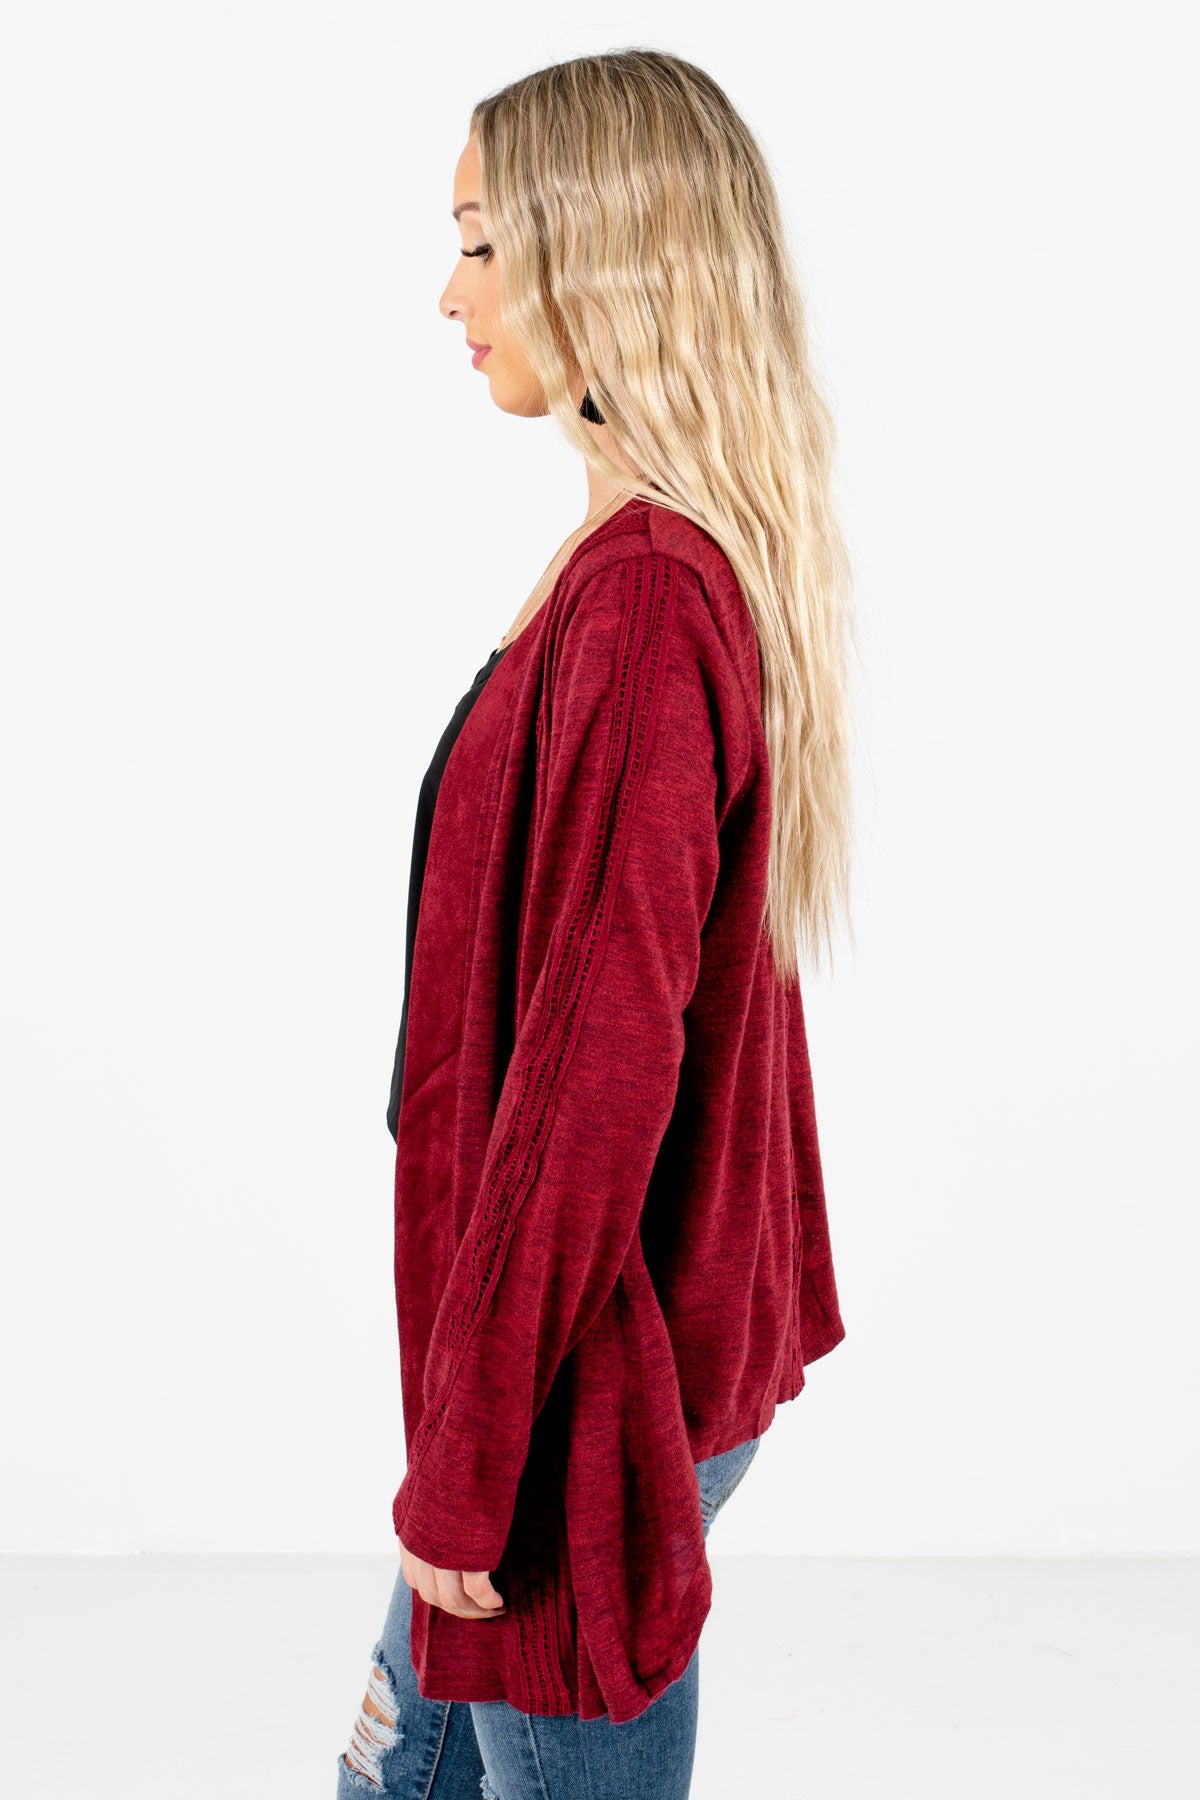 Burgundy Warm and Cozy Boutique Cardigans for Women